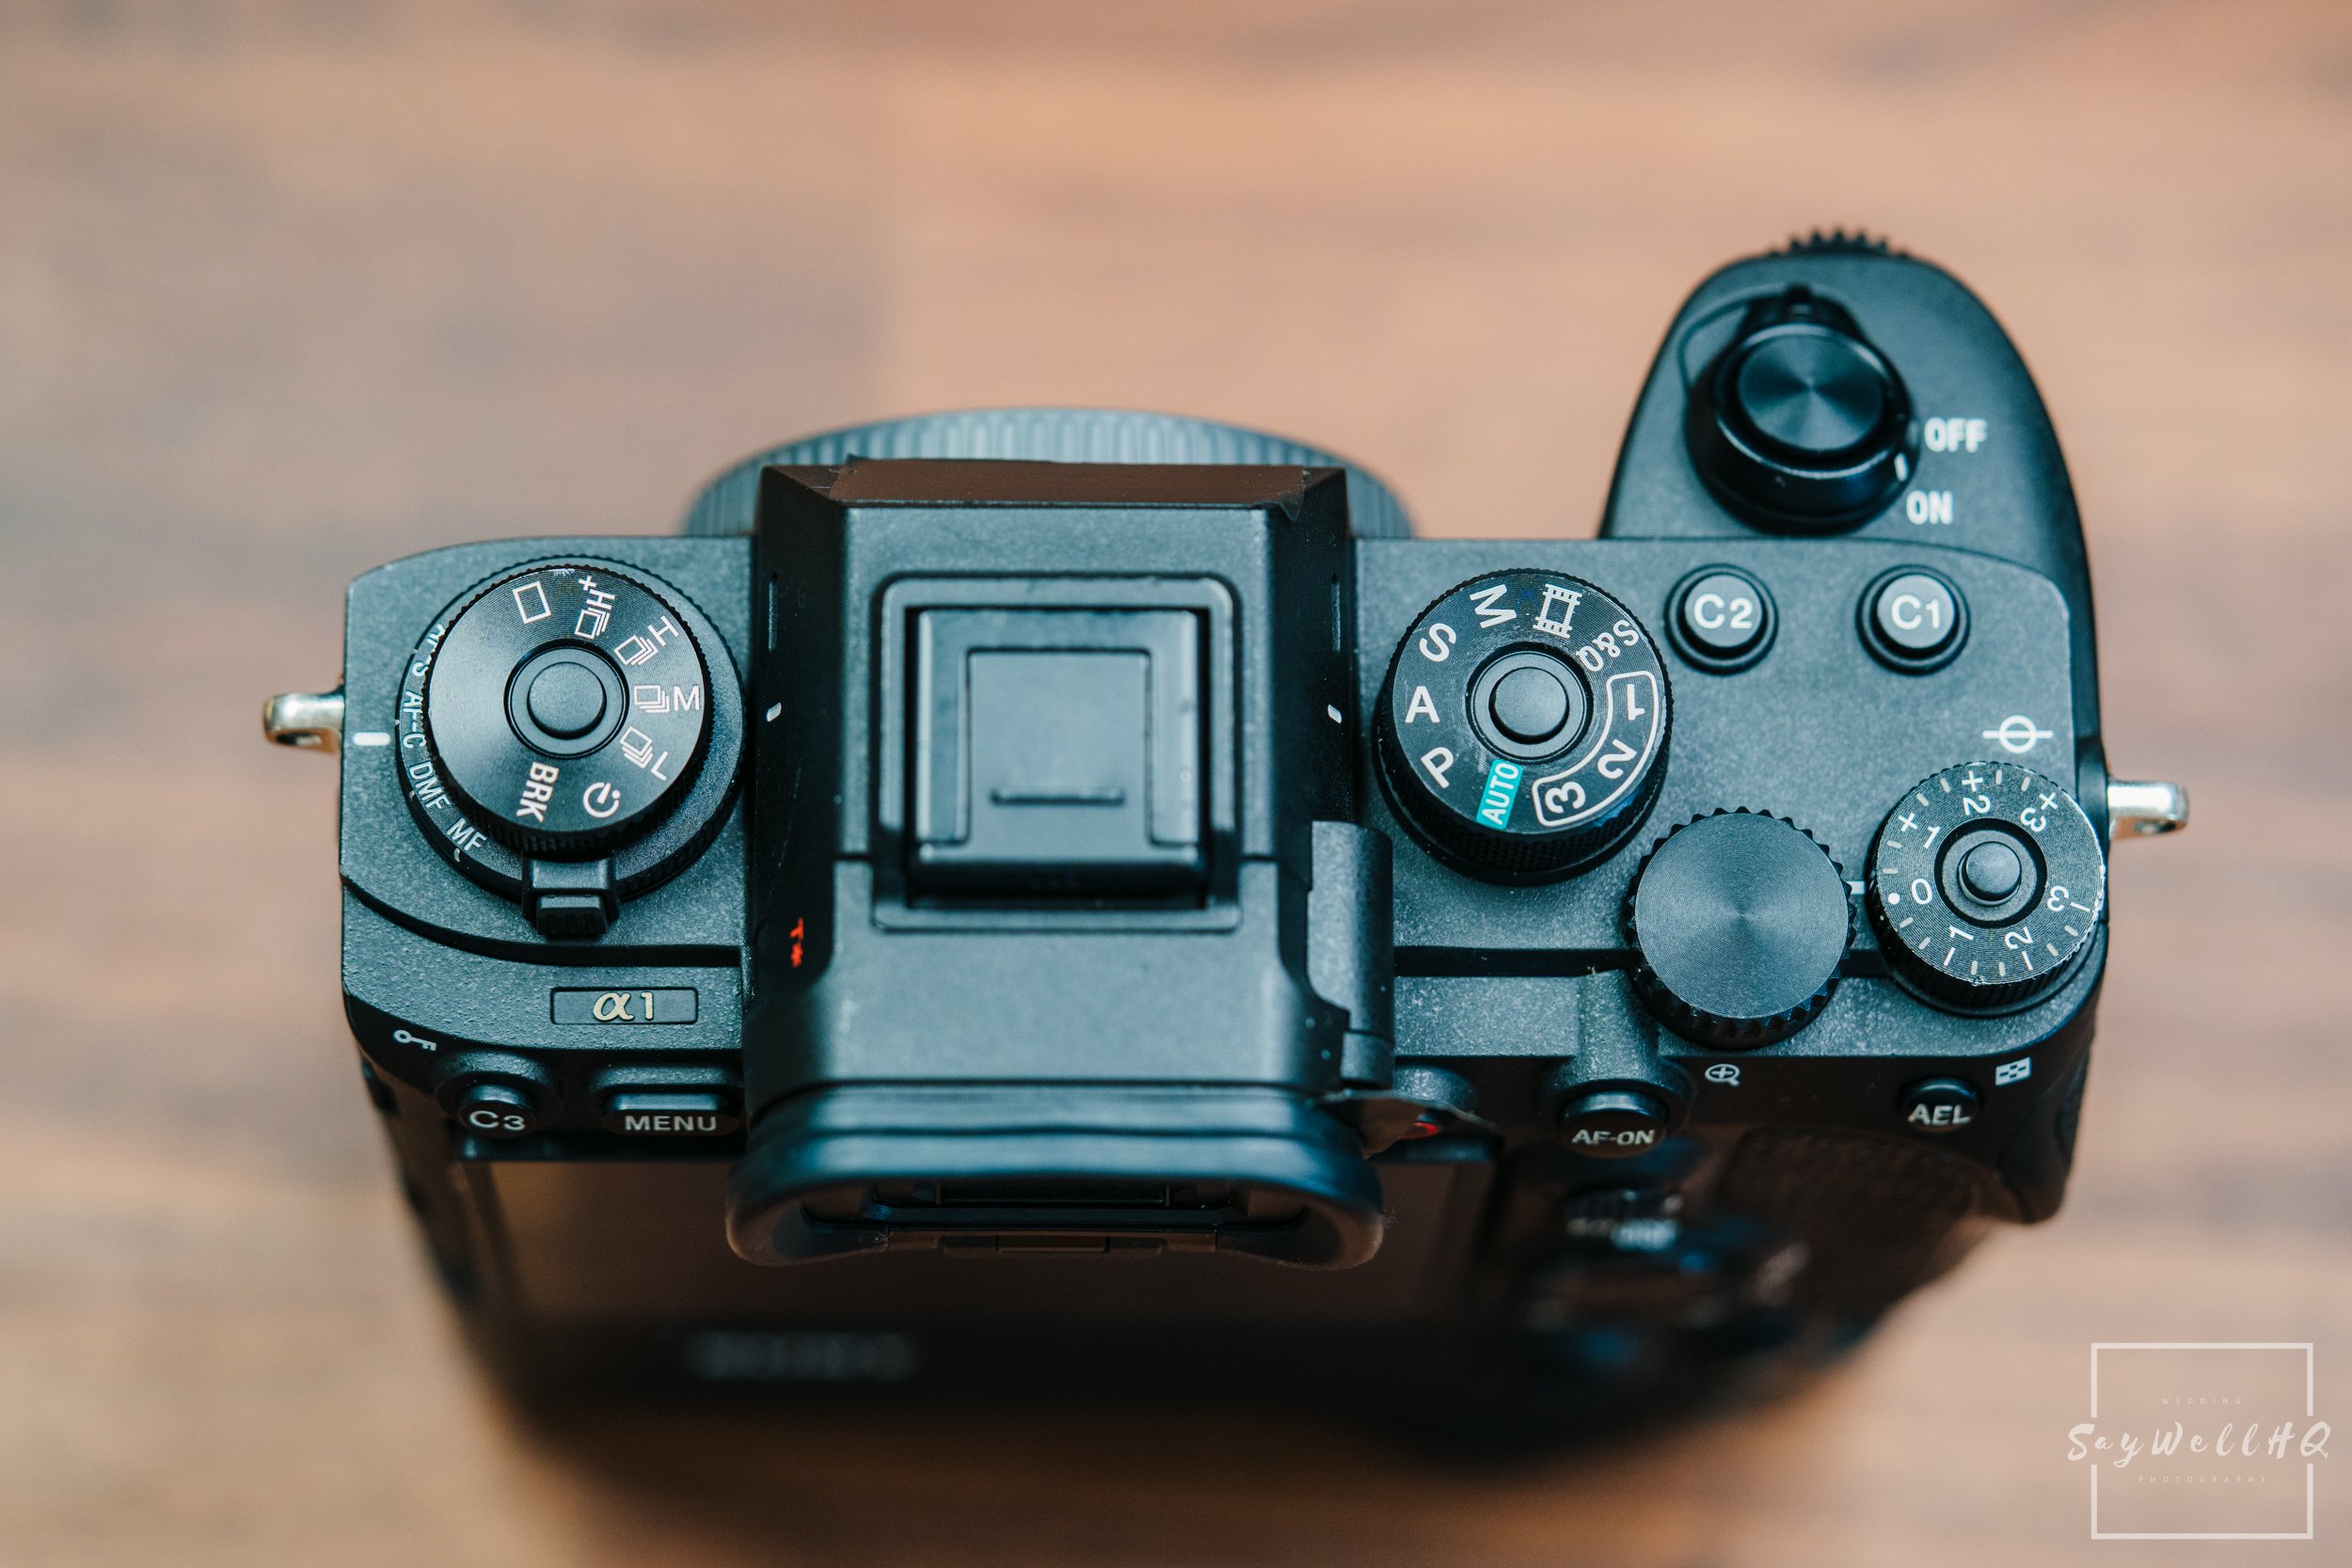 Seven Reasons Why the Sony a7 III Is the Best Wedding Photography Camera  You Can Buy